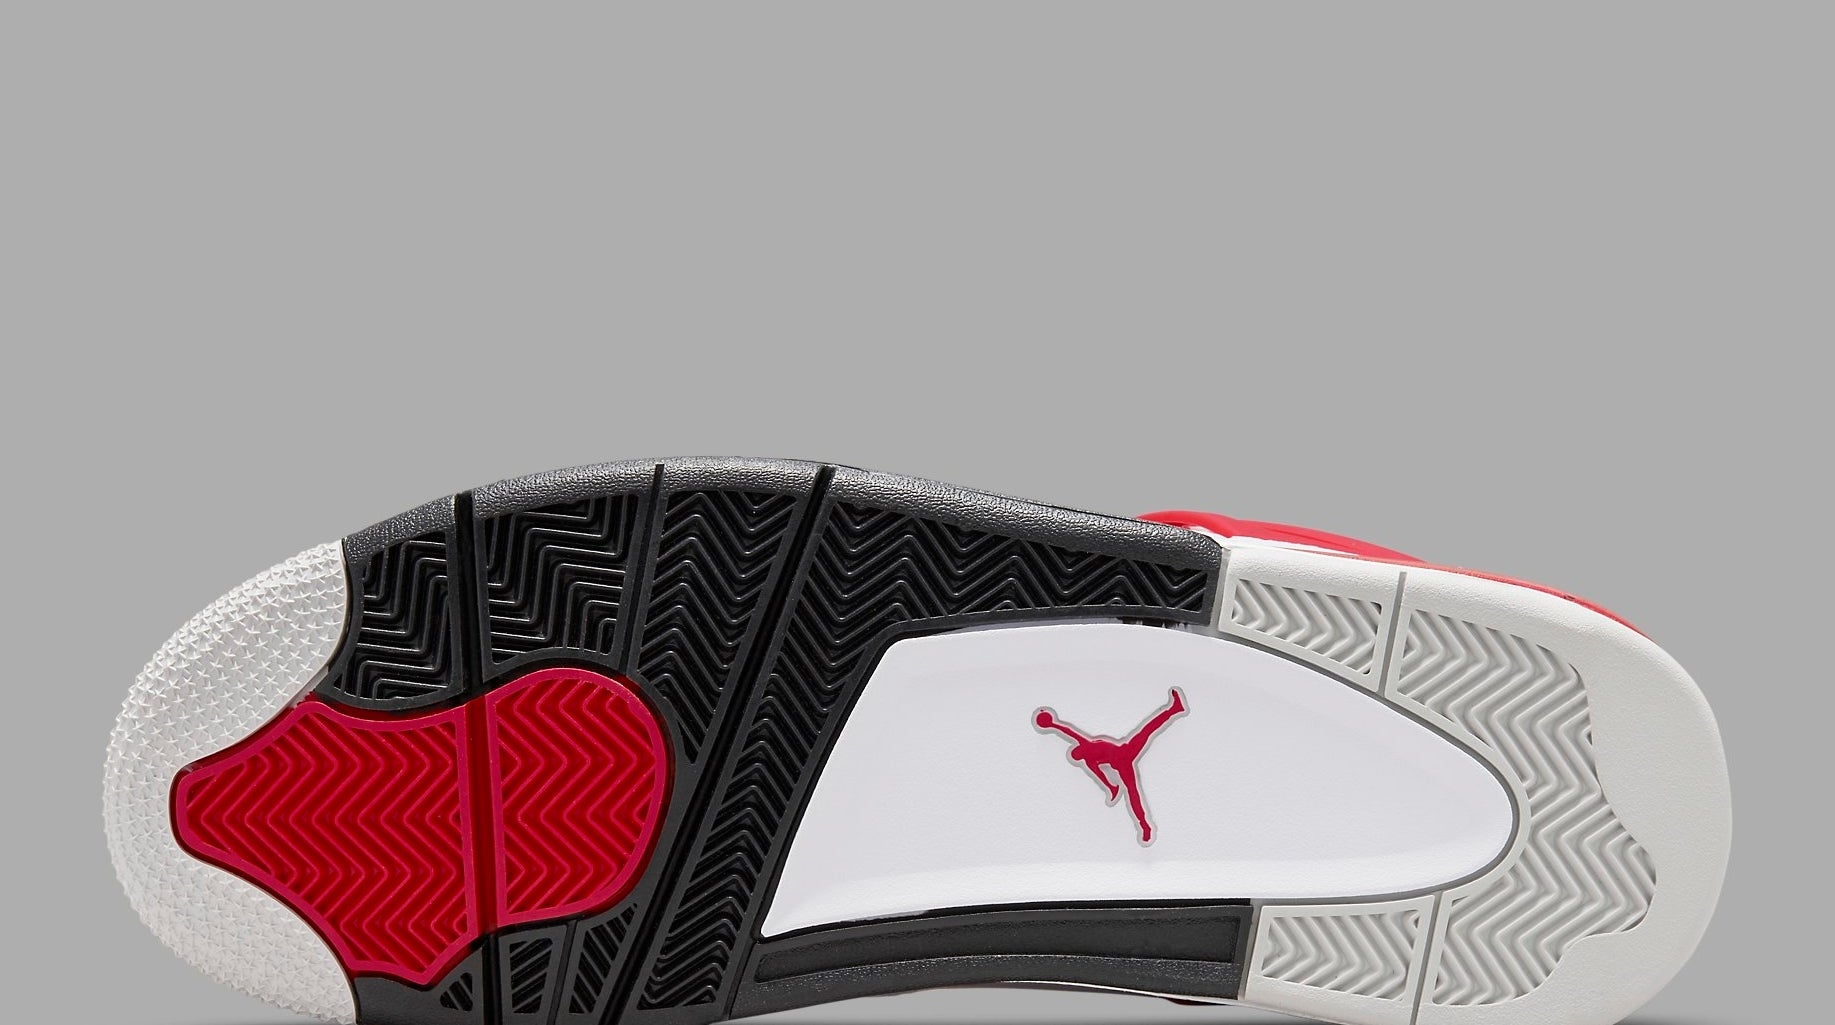 The Air Jordan 4 'Red Cement' is a hotter younger model of an '80s